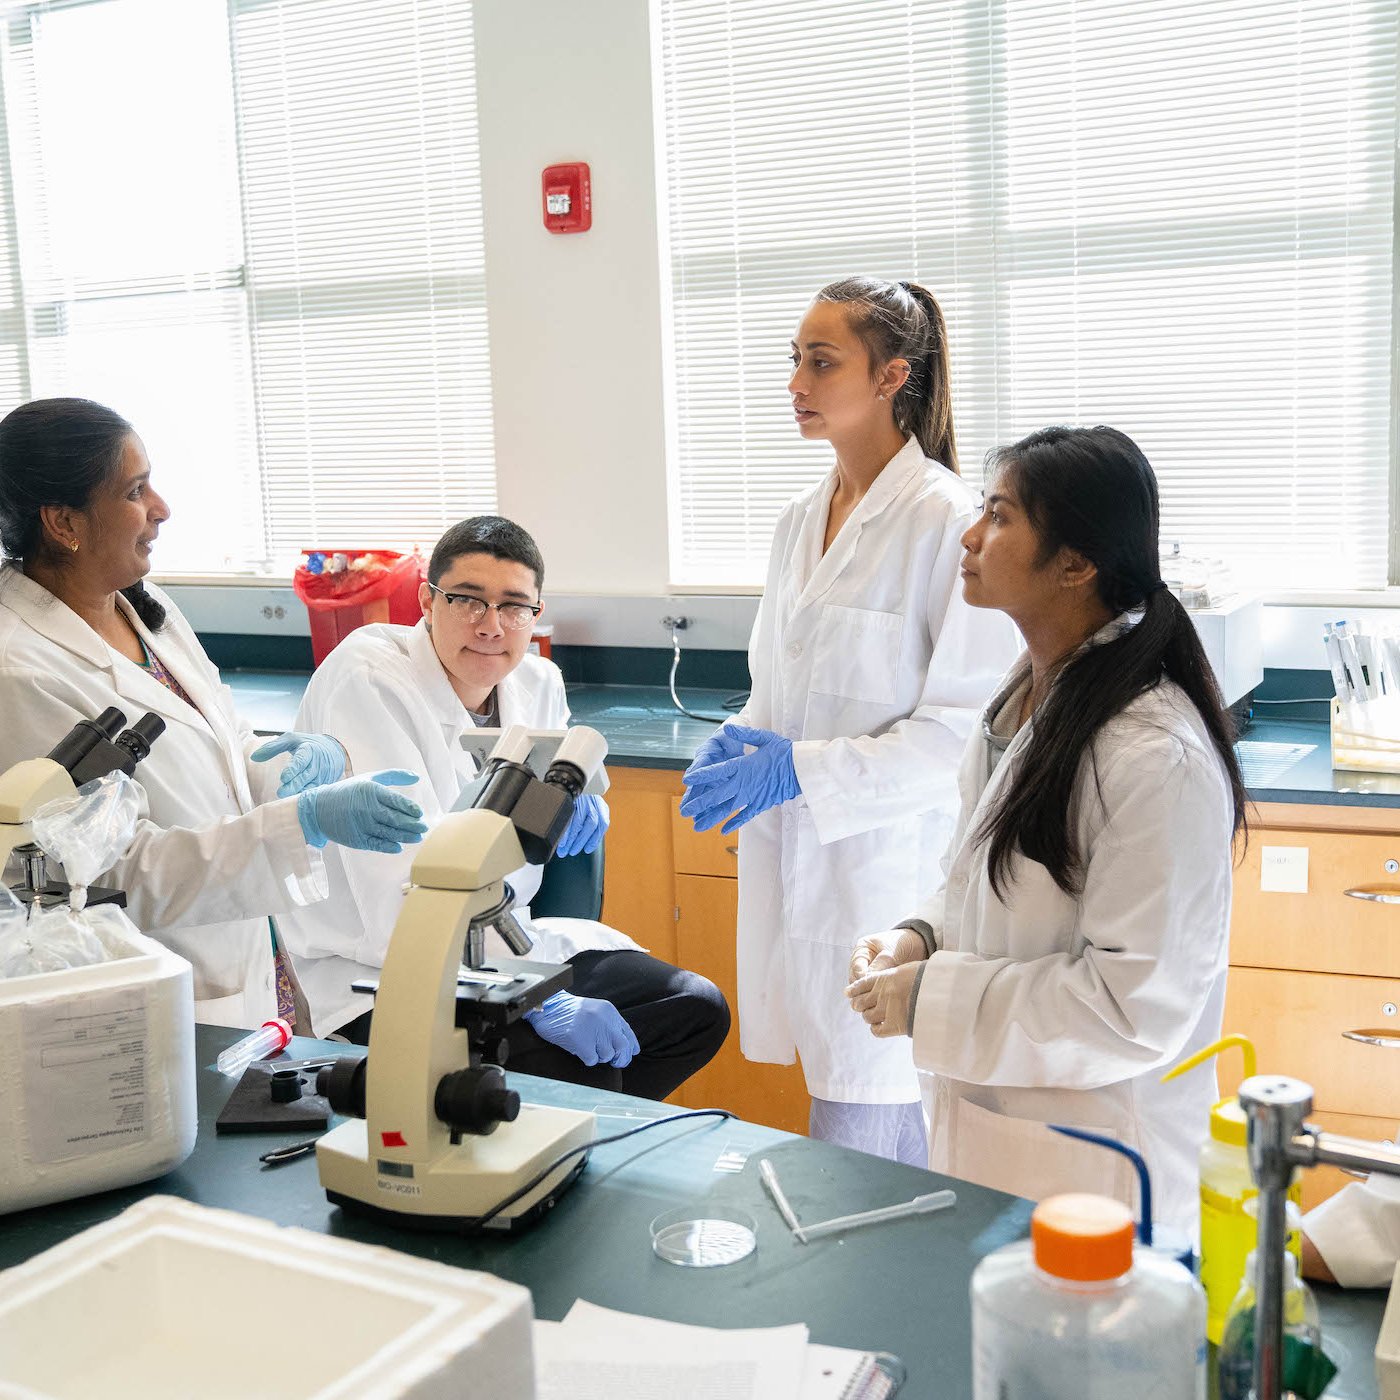 Students listen to an instructor in the lab